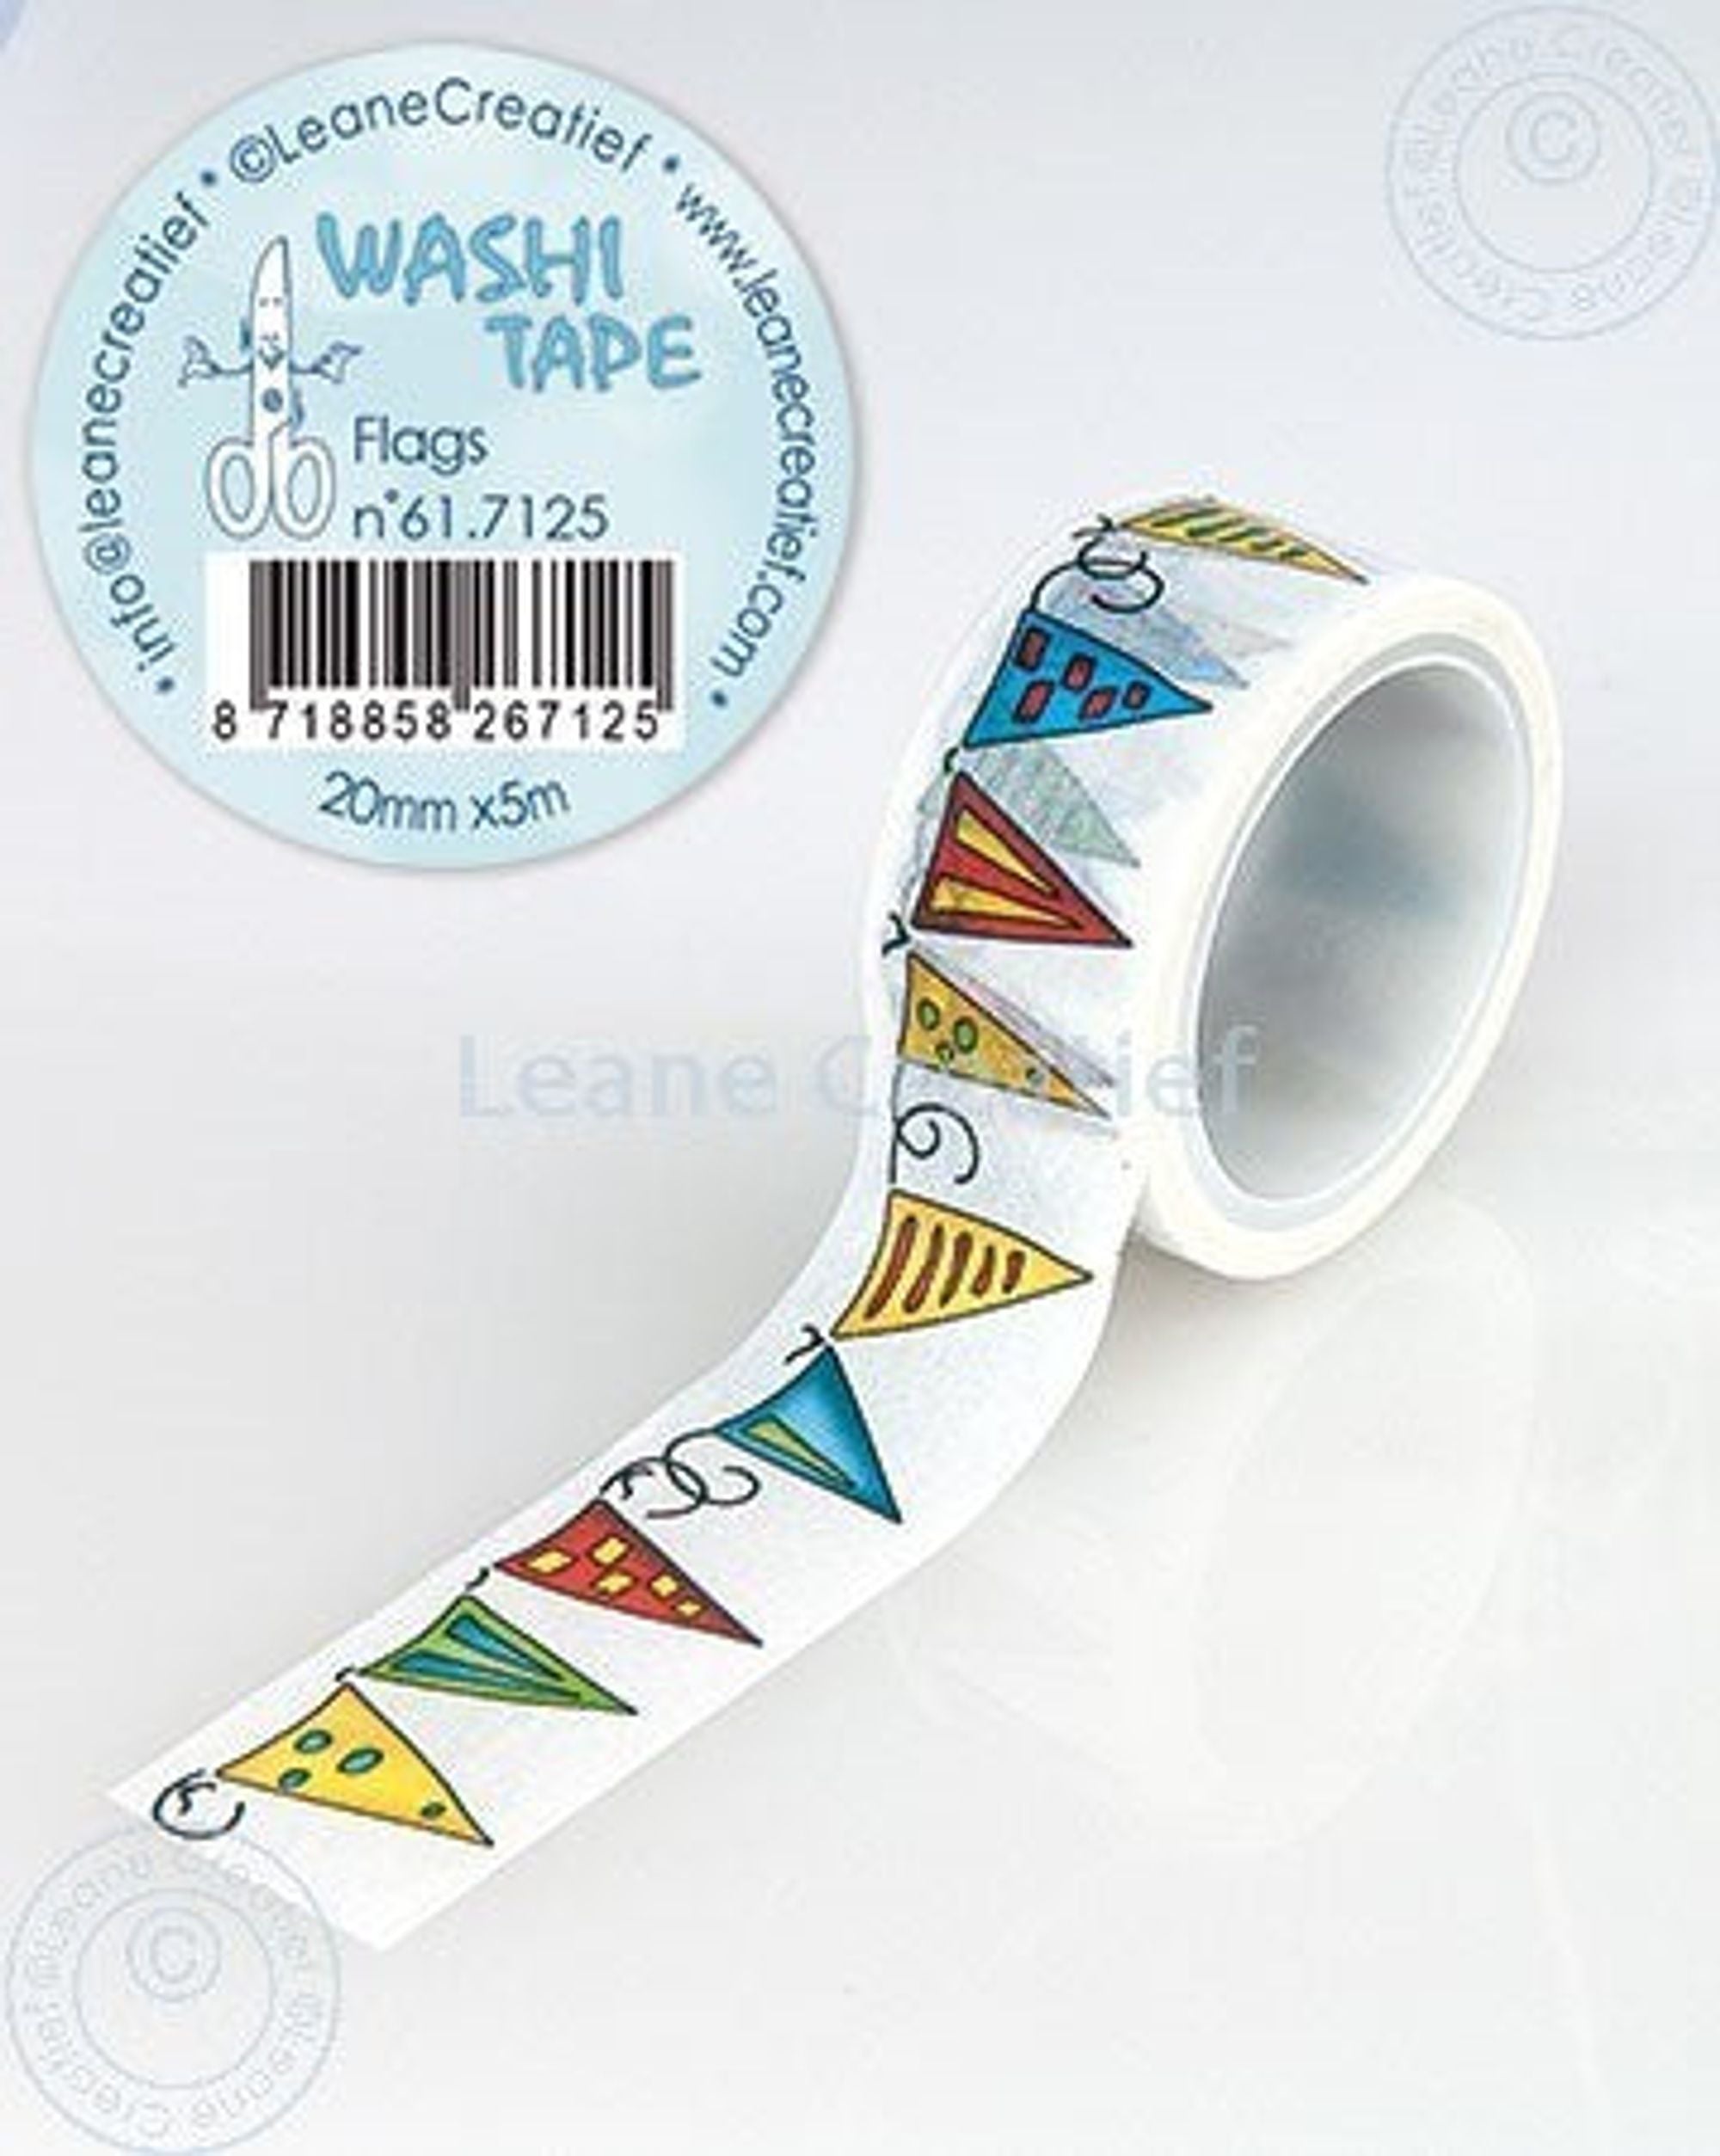 Washi Tape Flags 20mm x 5m